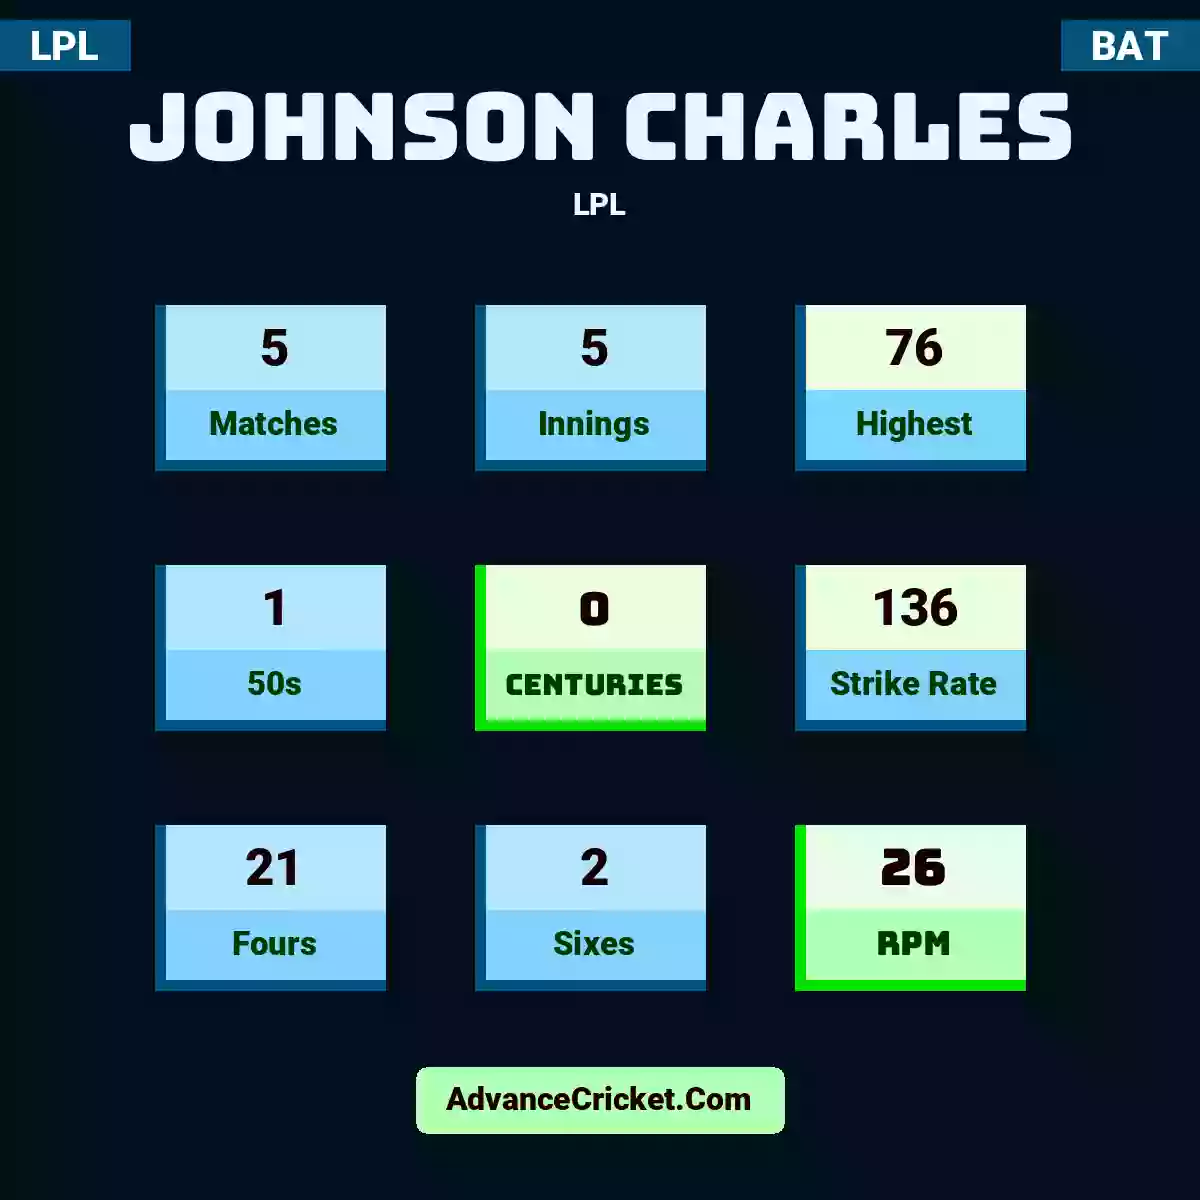 Johnson Charles LPL , Johnson Charles played 5 matches, scored 76 runs as highest, 1 half-centuries, and 0 centuries, with a strike rate of 136. J.Charles hit 21 fours and 2 sixes, with an RPM of 26.